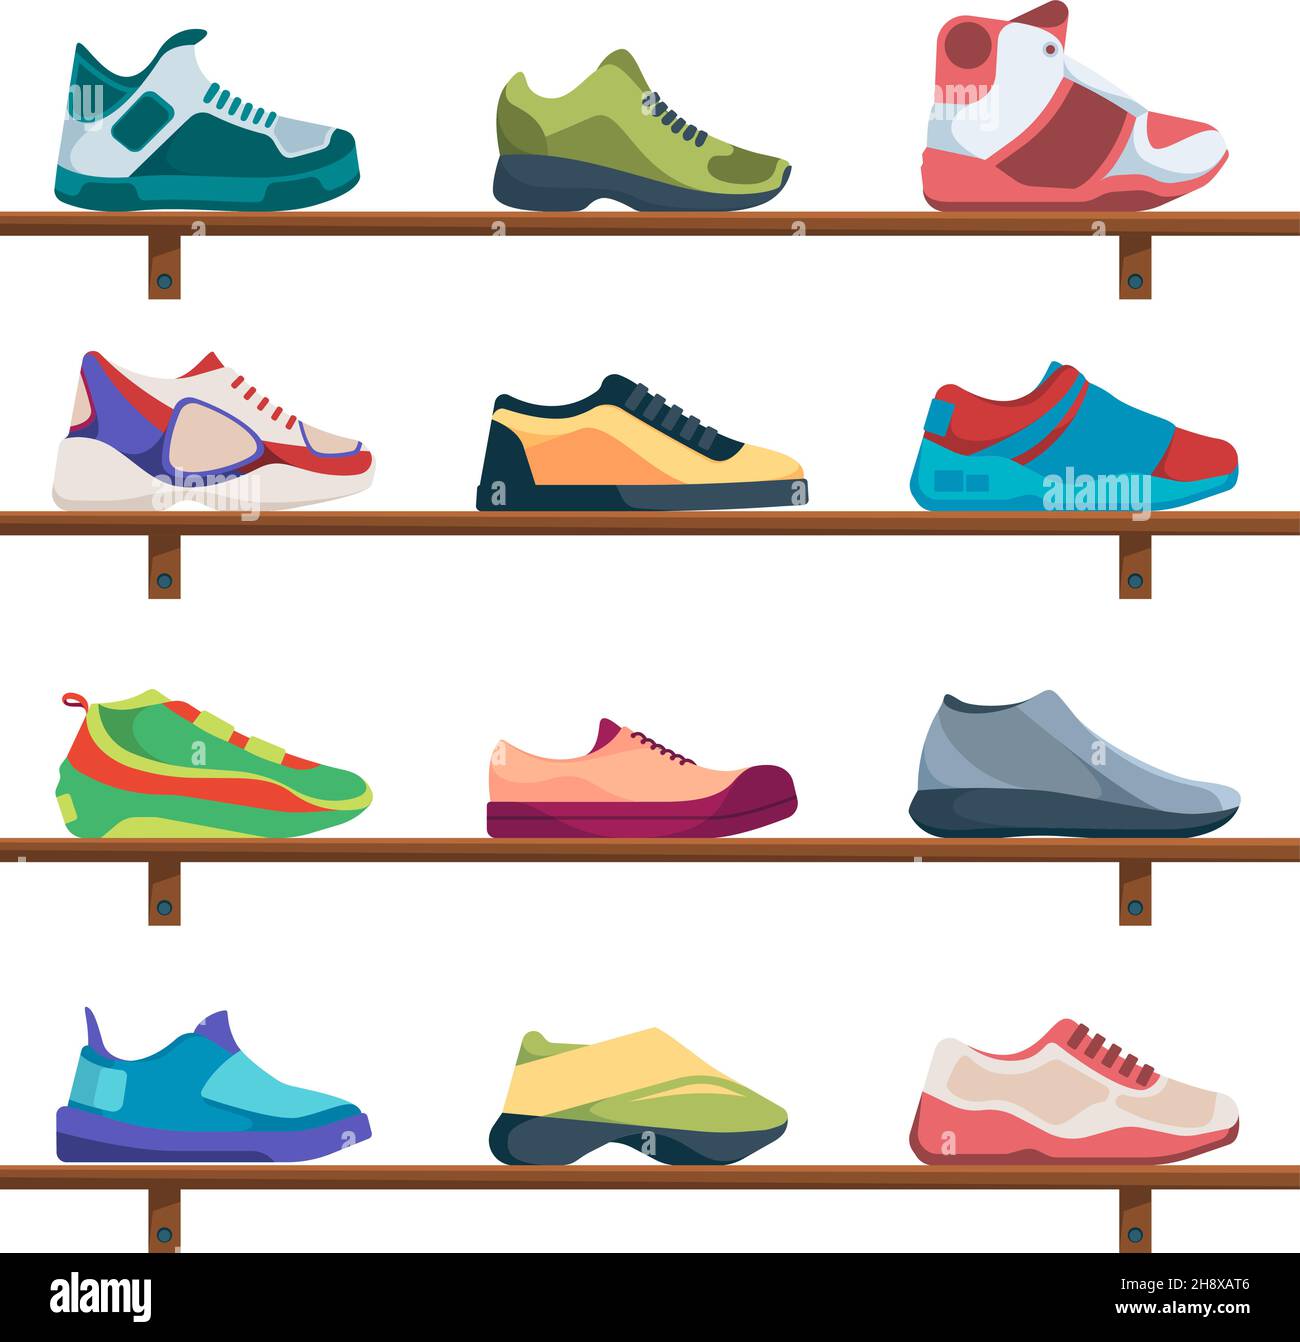 Sneakers collection. Sport footwear athletic fashioned colored shoes garish vector casual running sneakers for men and women Stock Vector